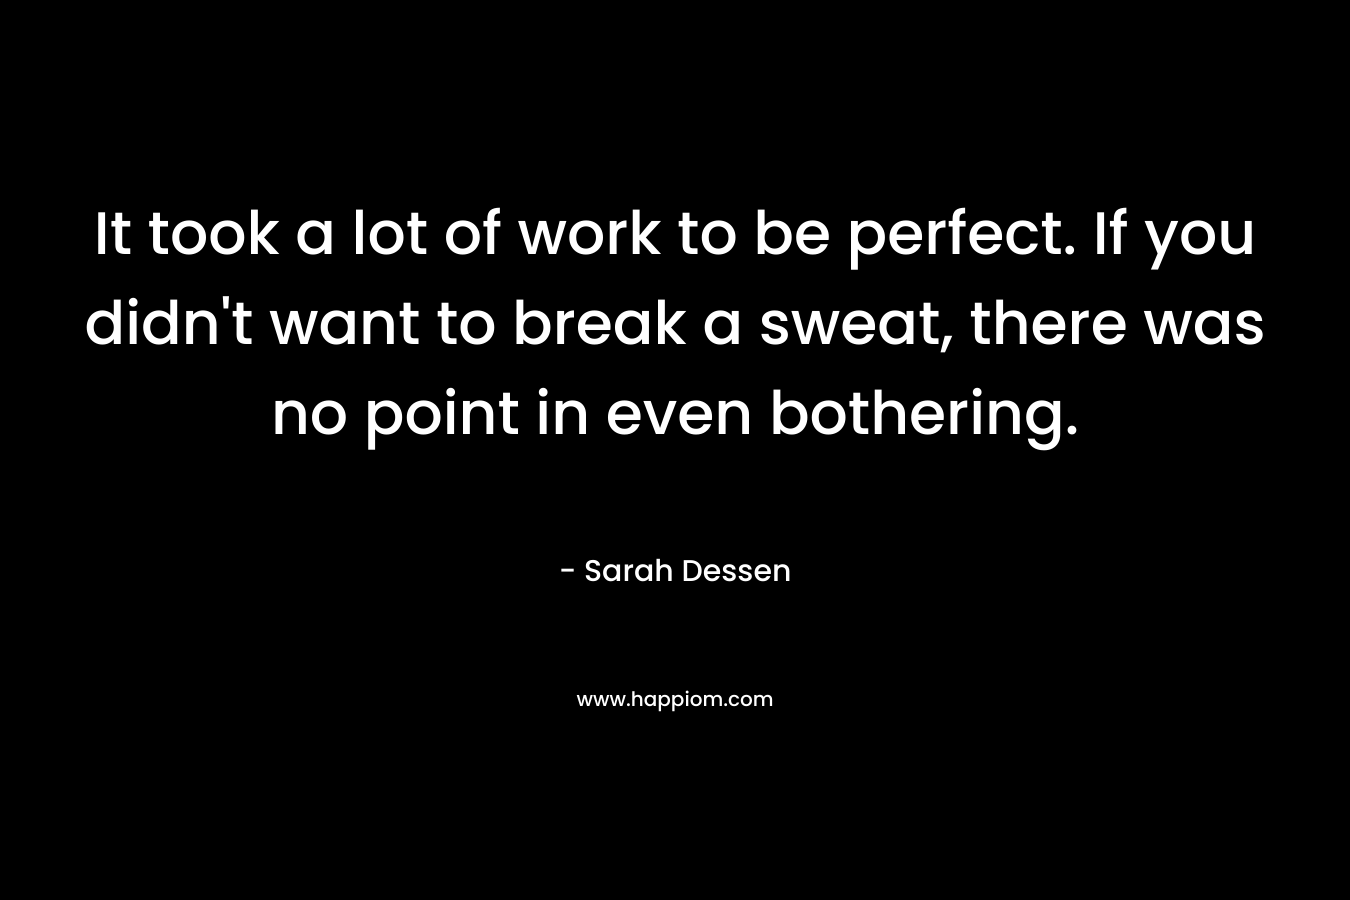 It took a lot of work to be perfect. If you didn’t want to break a sweat, there was no point in even bothering. – Sarah Dessen